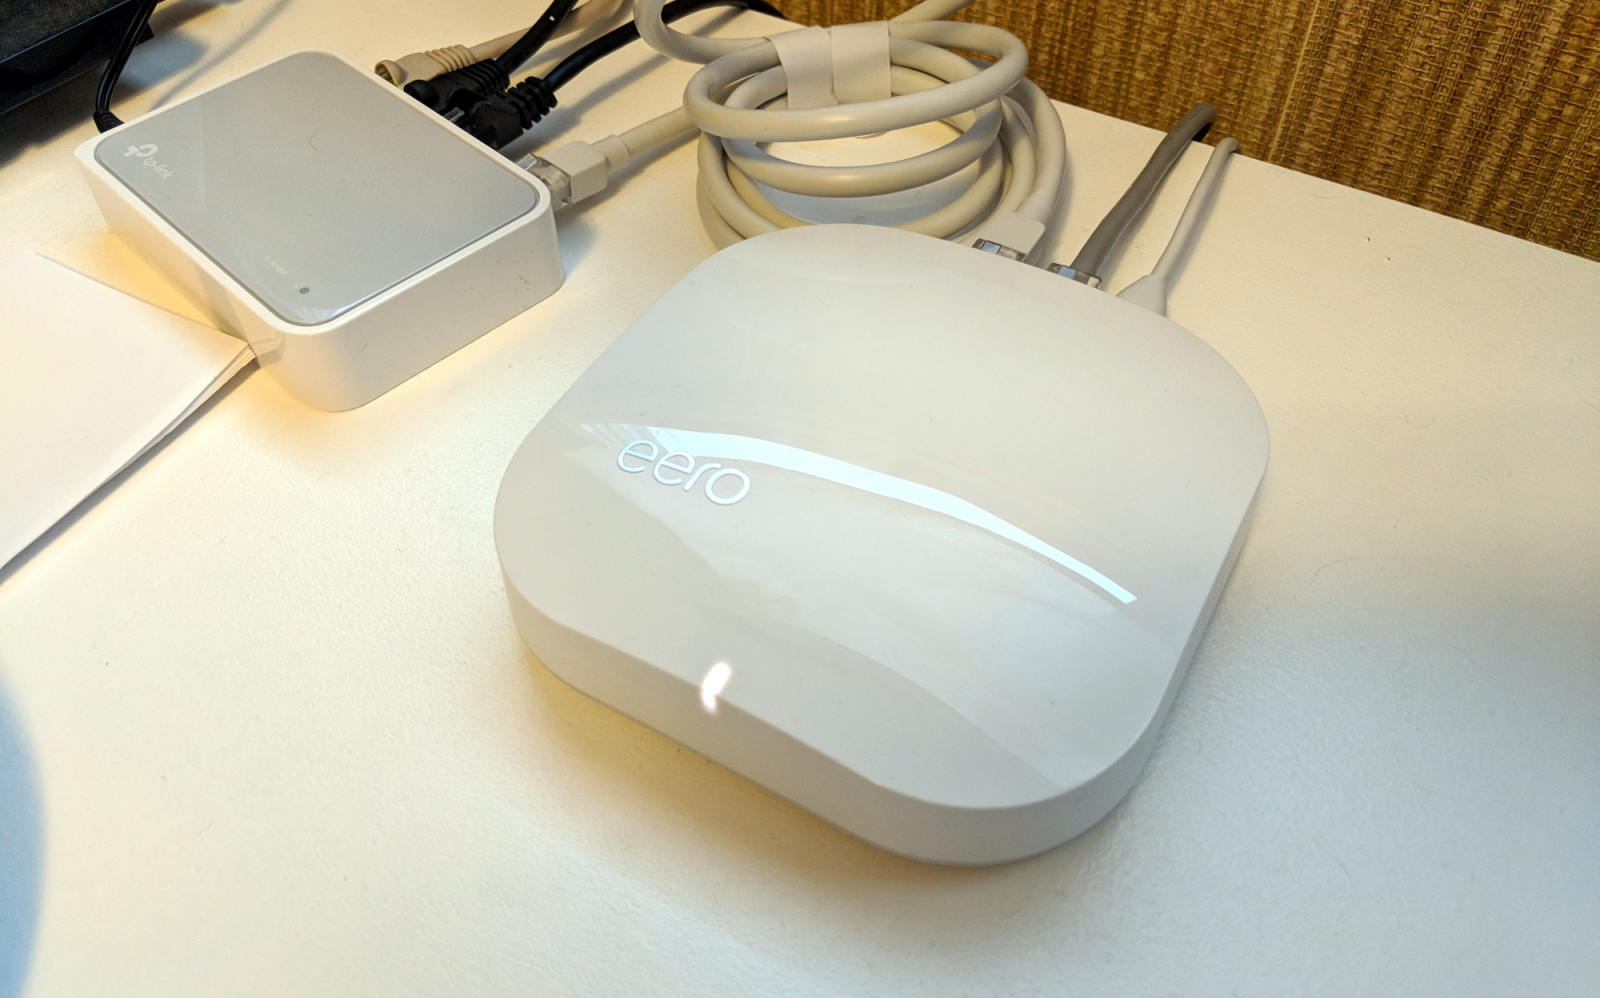 access eero router from web browser